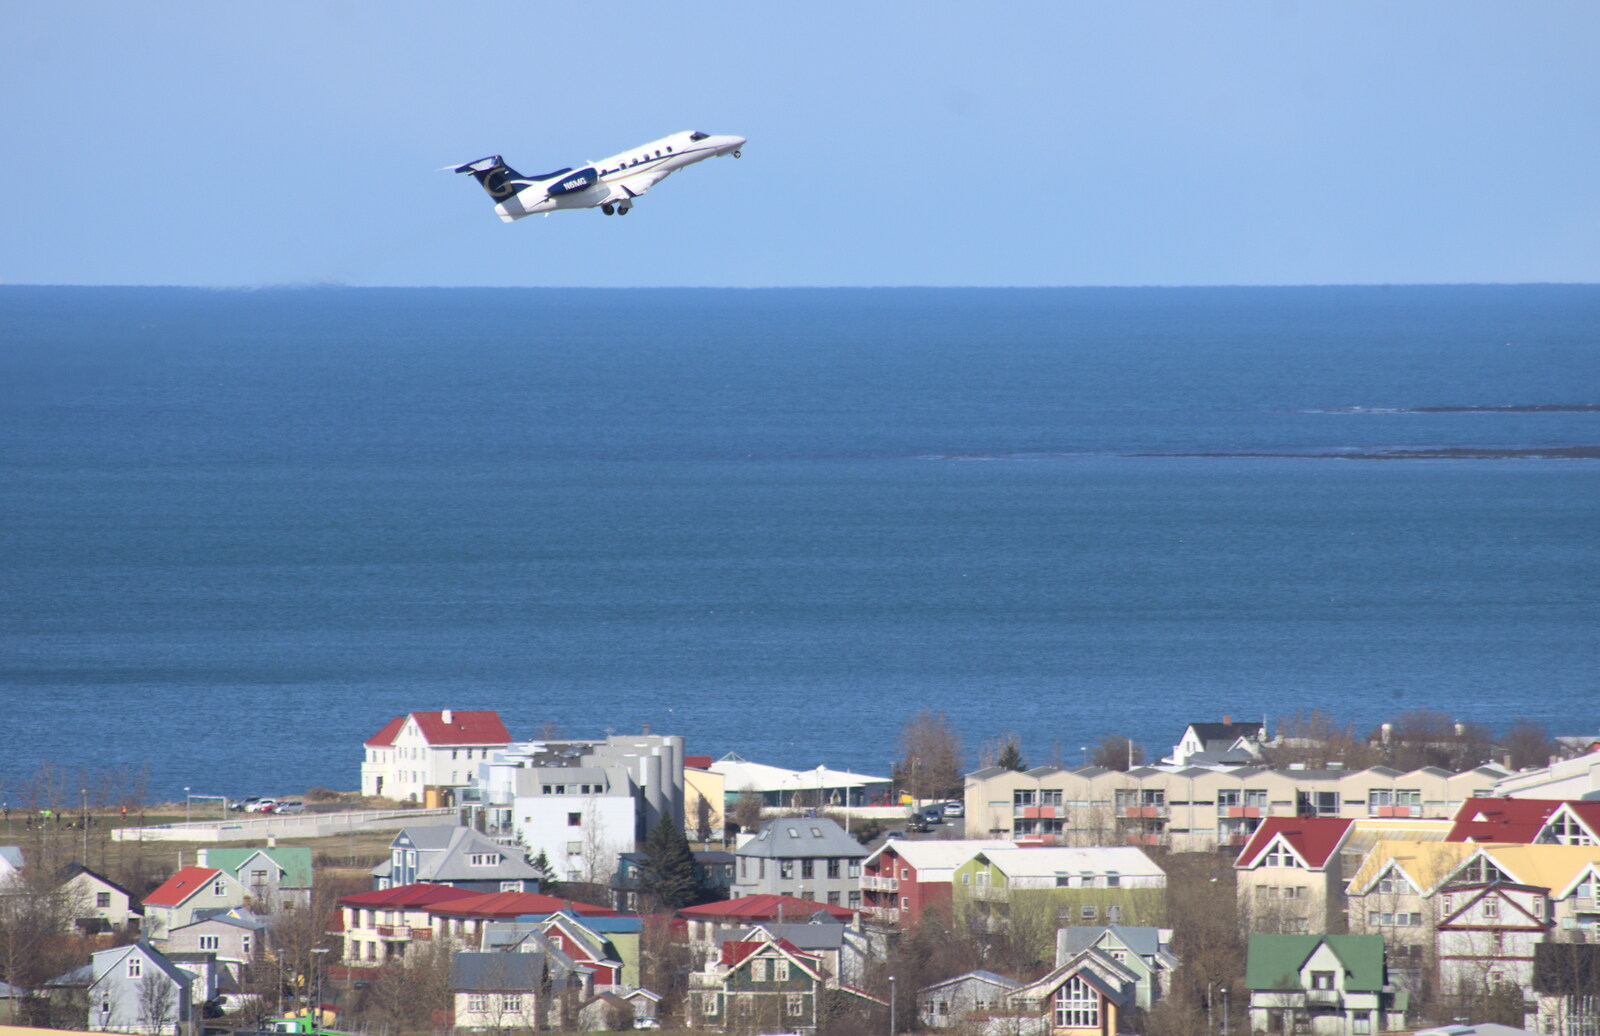 A small executive jet takes off from the airport from Stríðsminjar War Relics, Perlan and Street Art, Reykjavik, Iceland - 23rd April 2017